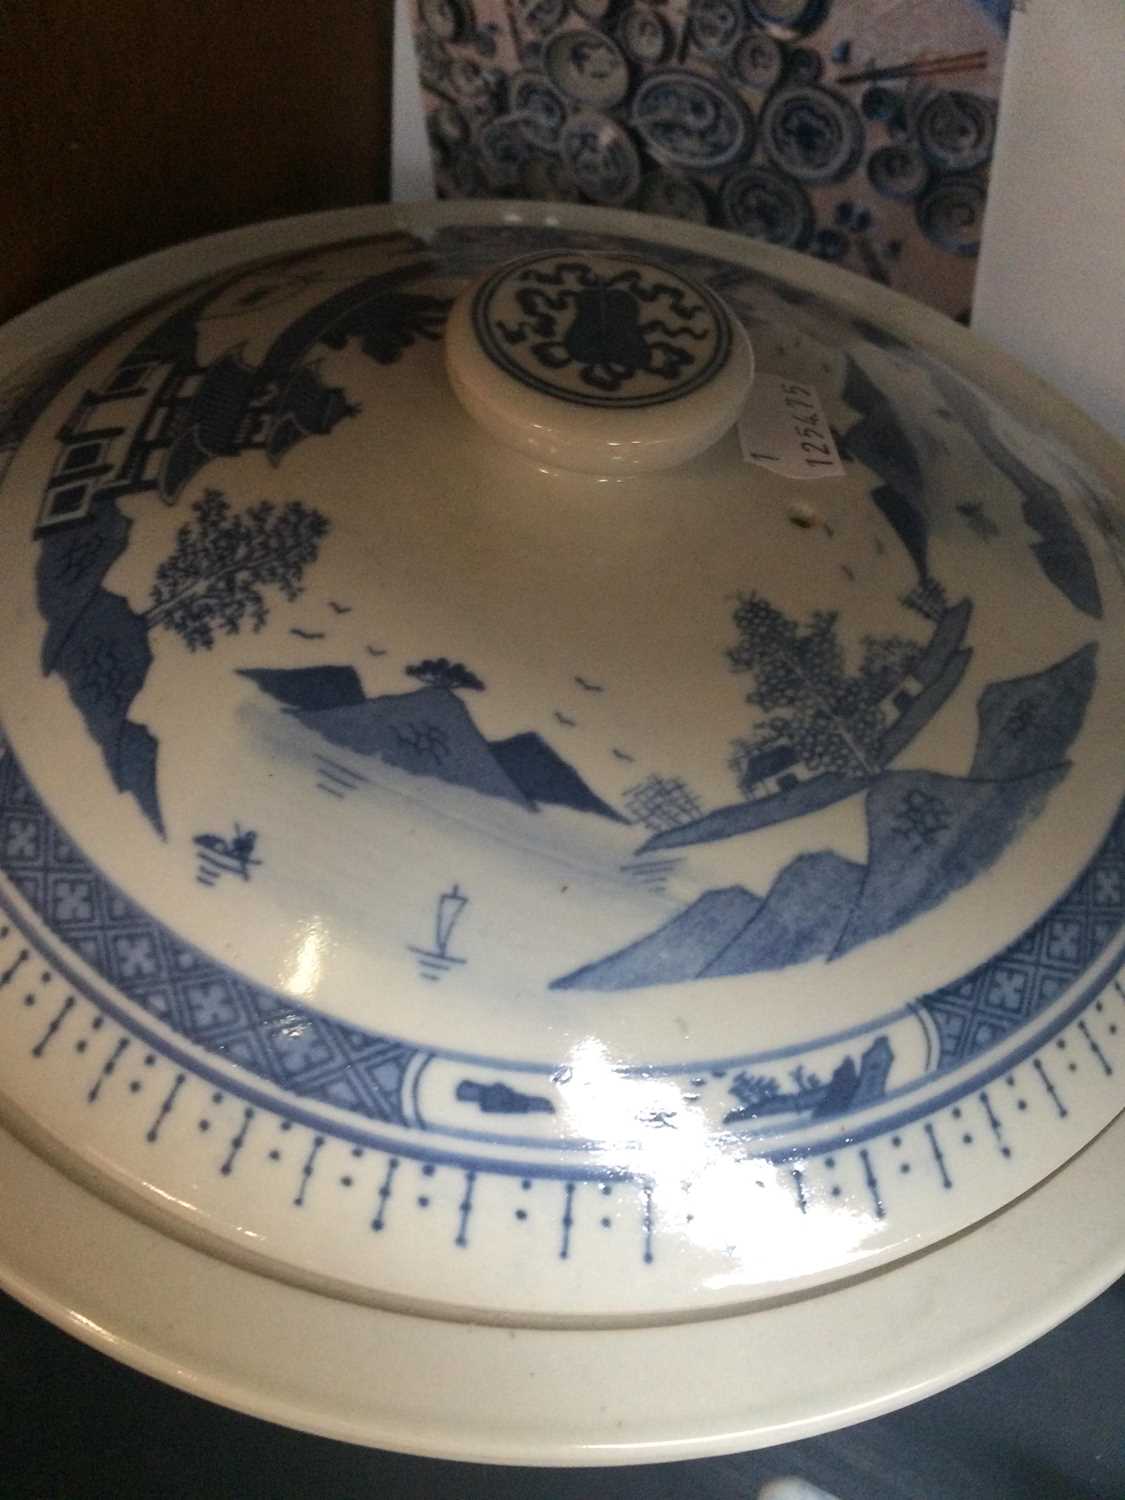 A Comprehensive Chinese Porcelain Dinner Service, painted in underglaze blue in the 18th century - Image 3 of 13